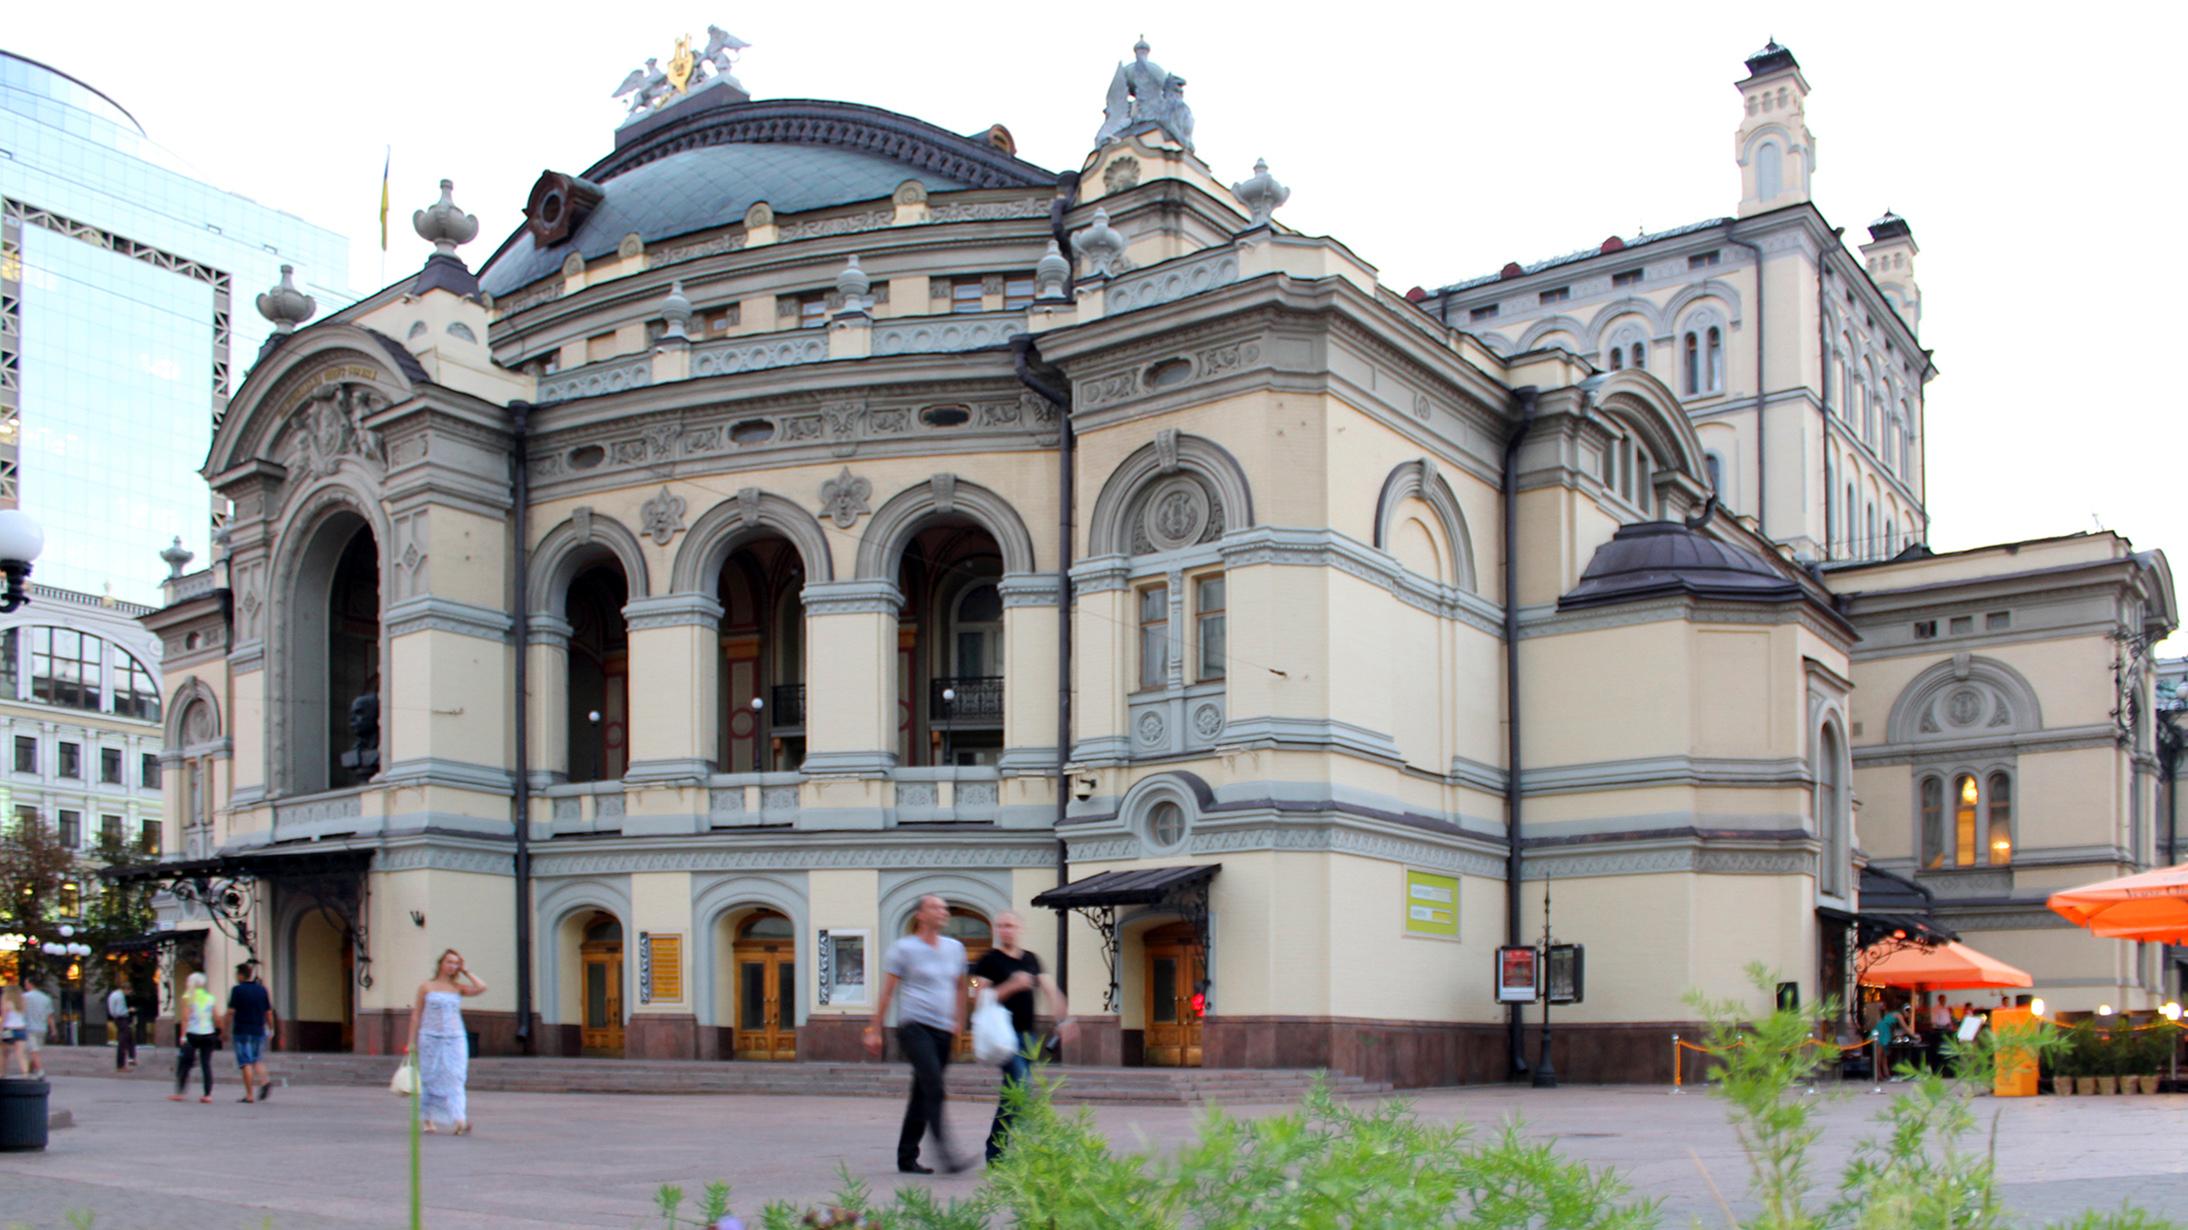 Cover image of this place National opera of Ukraine